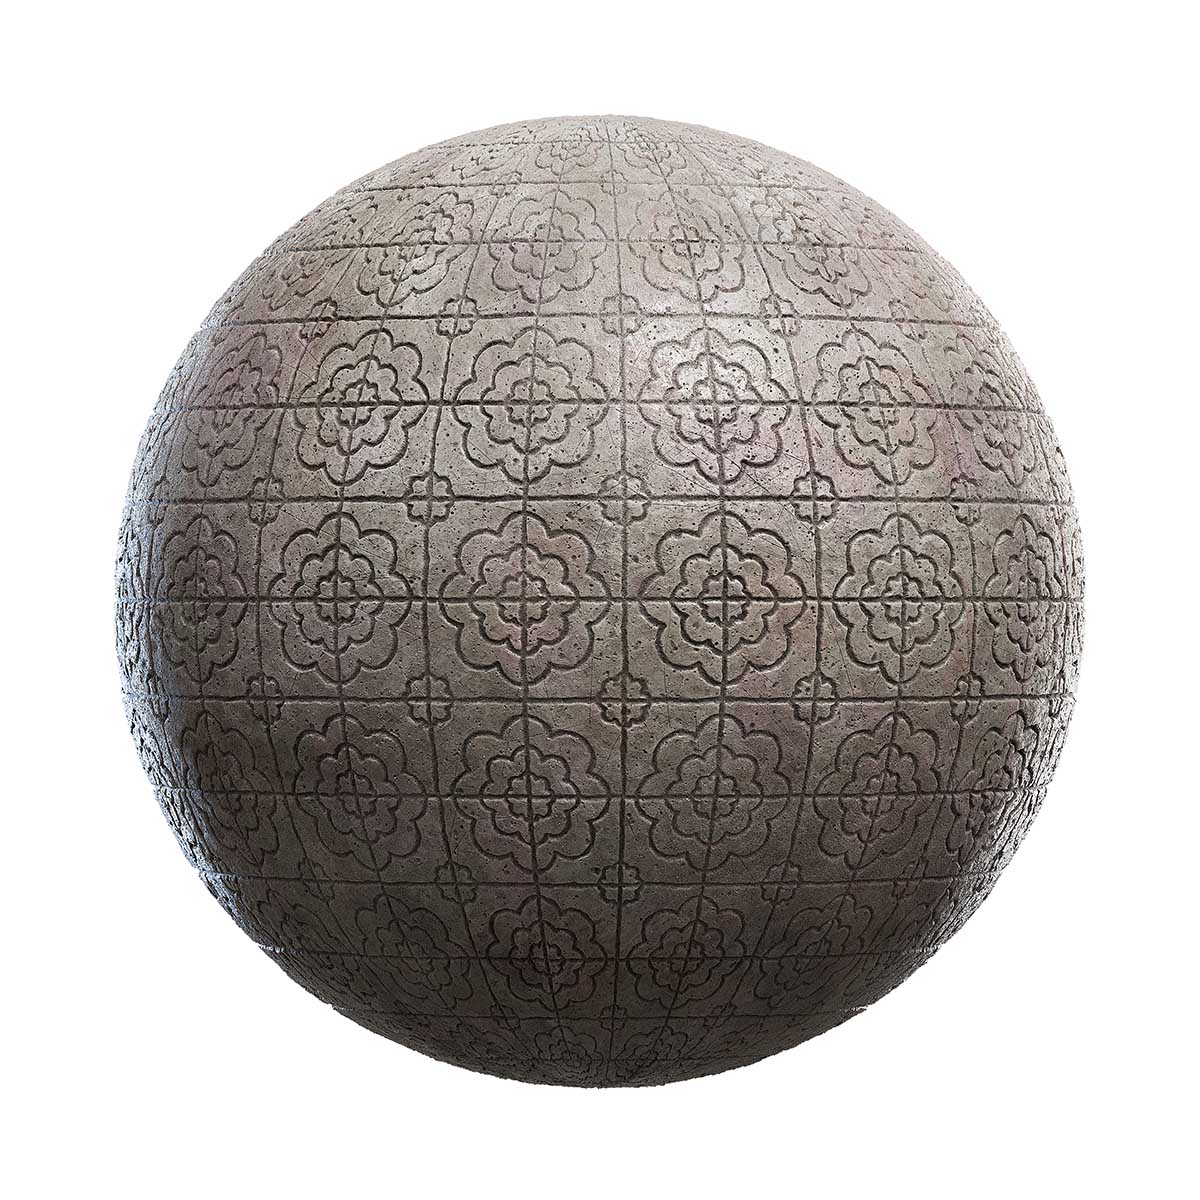 Patterned Grey Clay PBR Texture